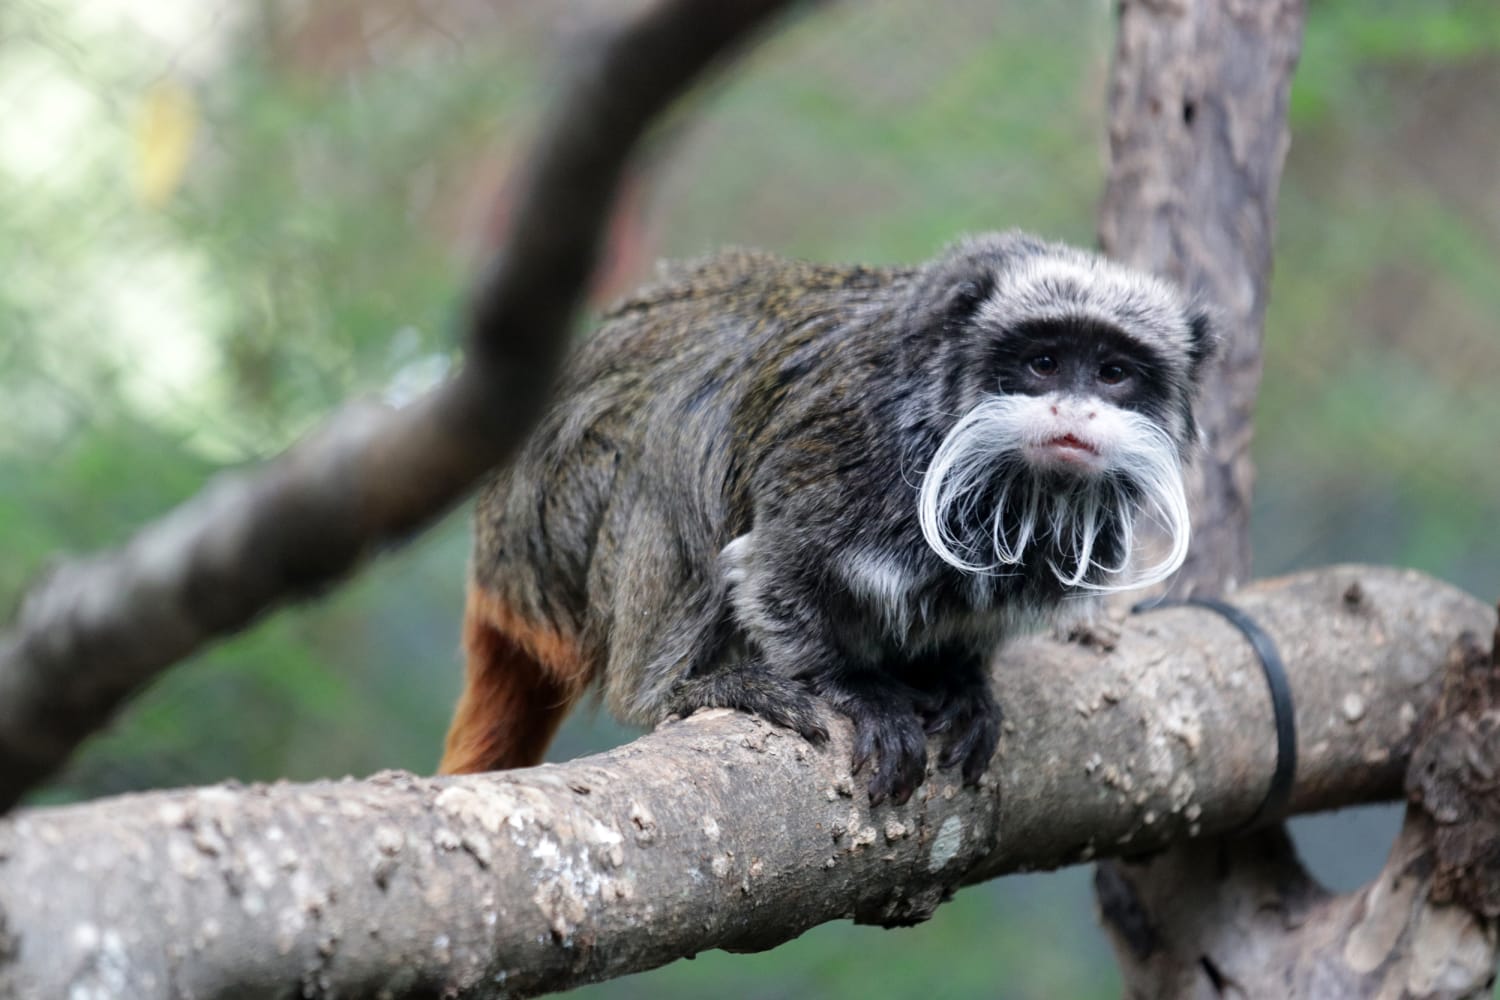 Dallas Zoo mystery deepens as missing tamarin monkeys are found in closet of abandoned home